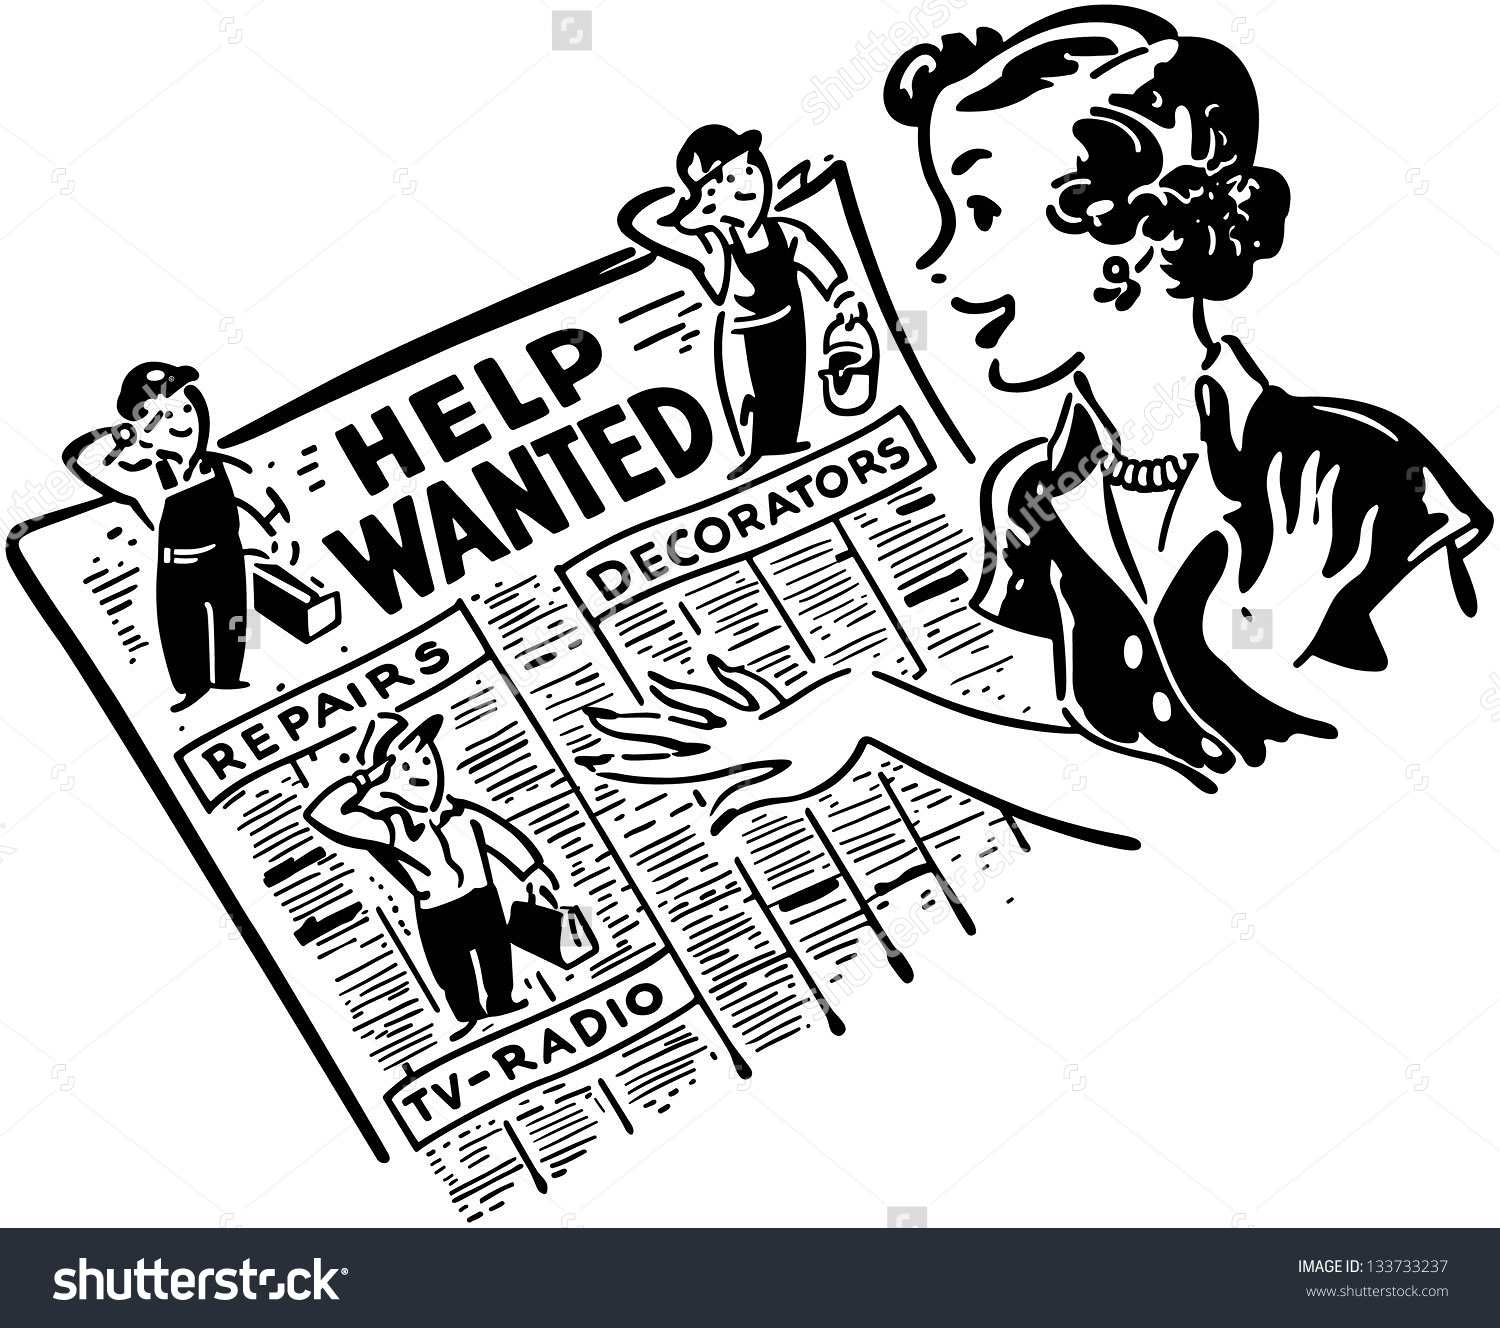 Gal Reading Help Wanted Ads - - Help Wanted Clip Art